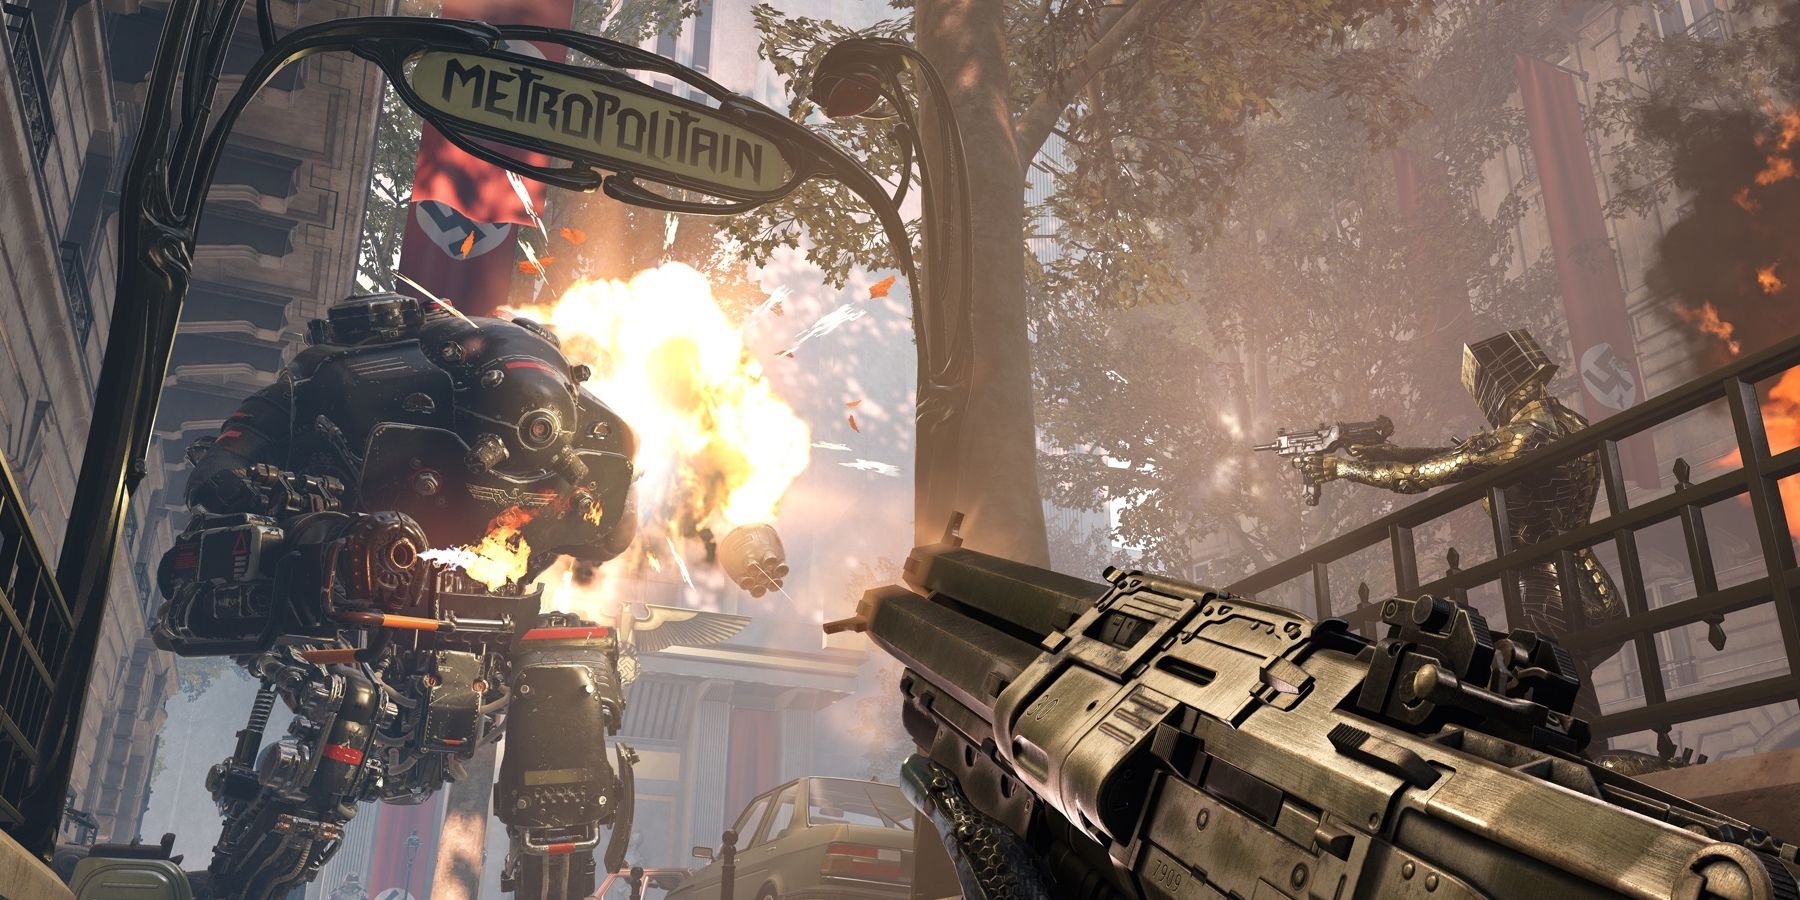 Sisters Jess and Zophia Blazkowicz shooting at a mech-suit machine Nazi that has a flamethrower in their armored exo-suits in Wolfenstein: Youngblood.